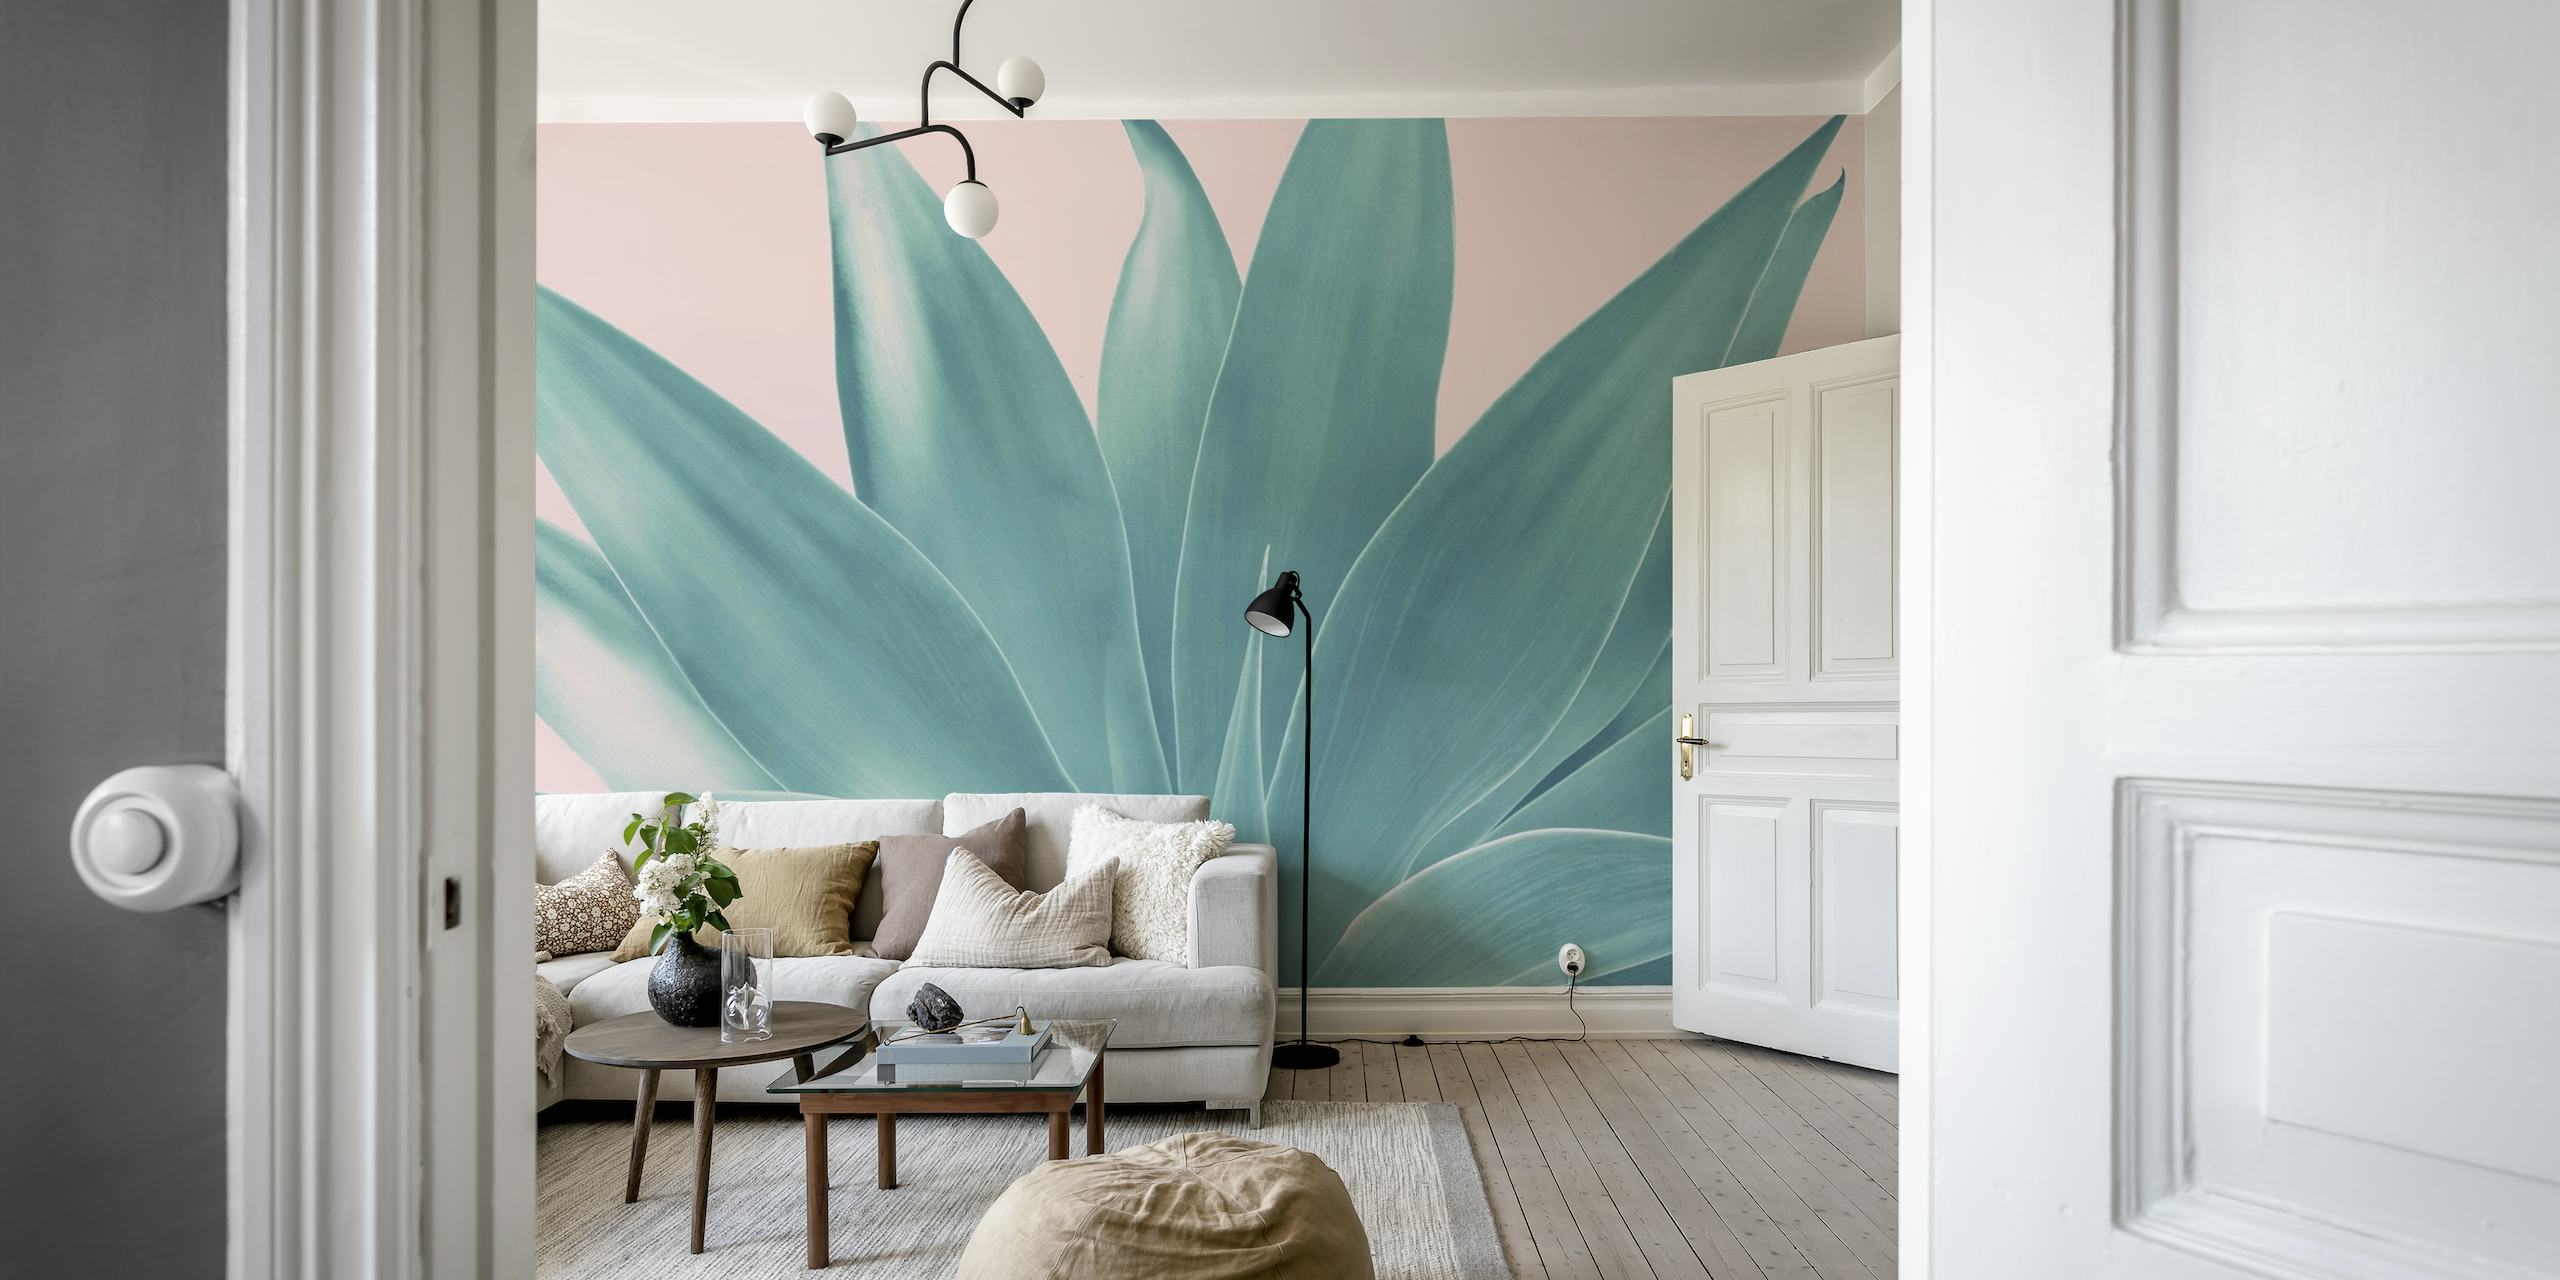 Blush Agave Finesse 1 behang